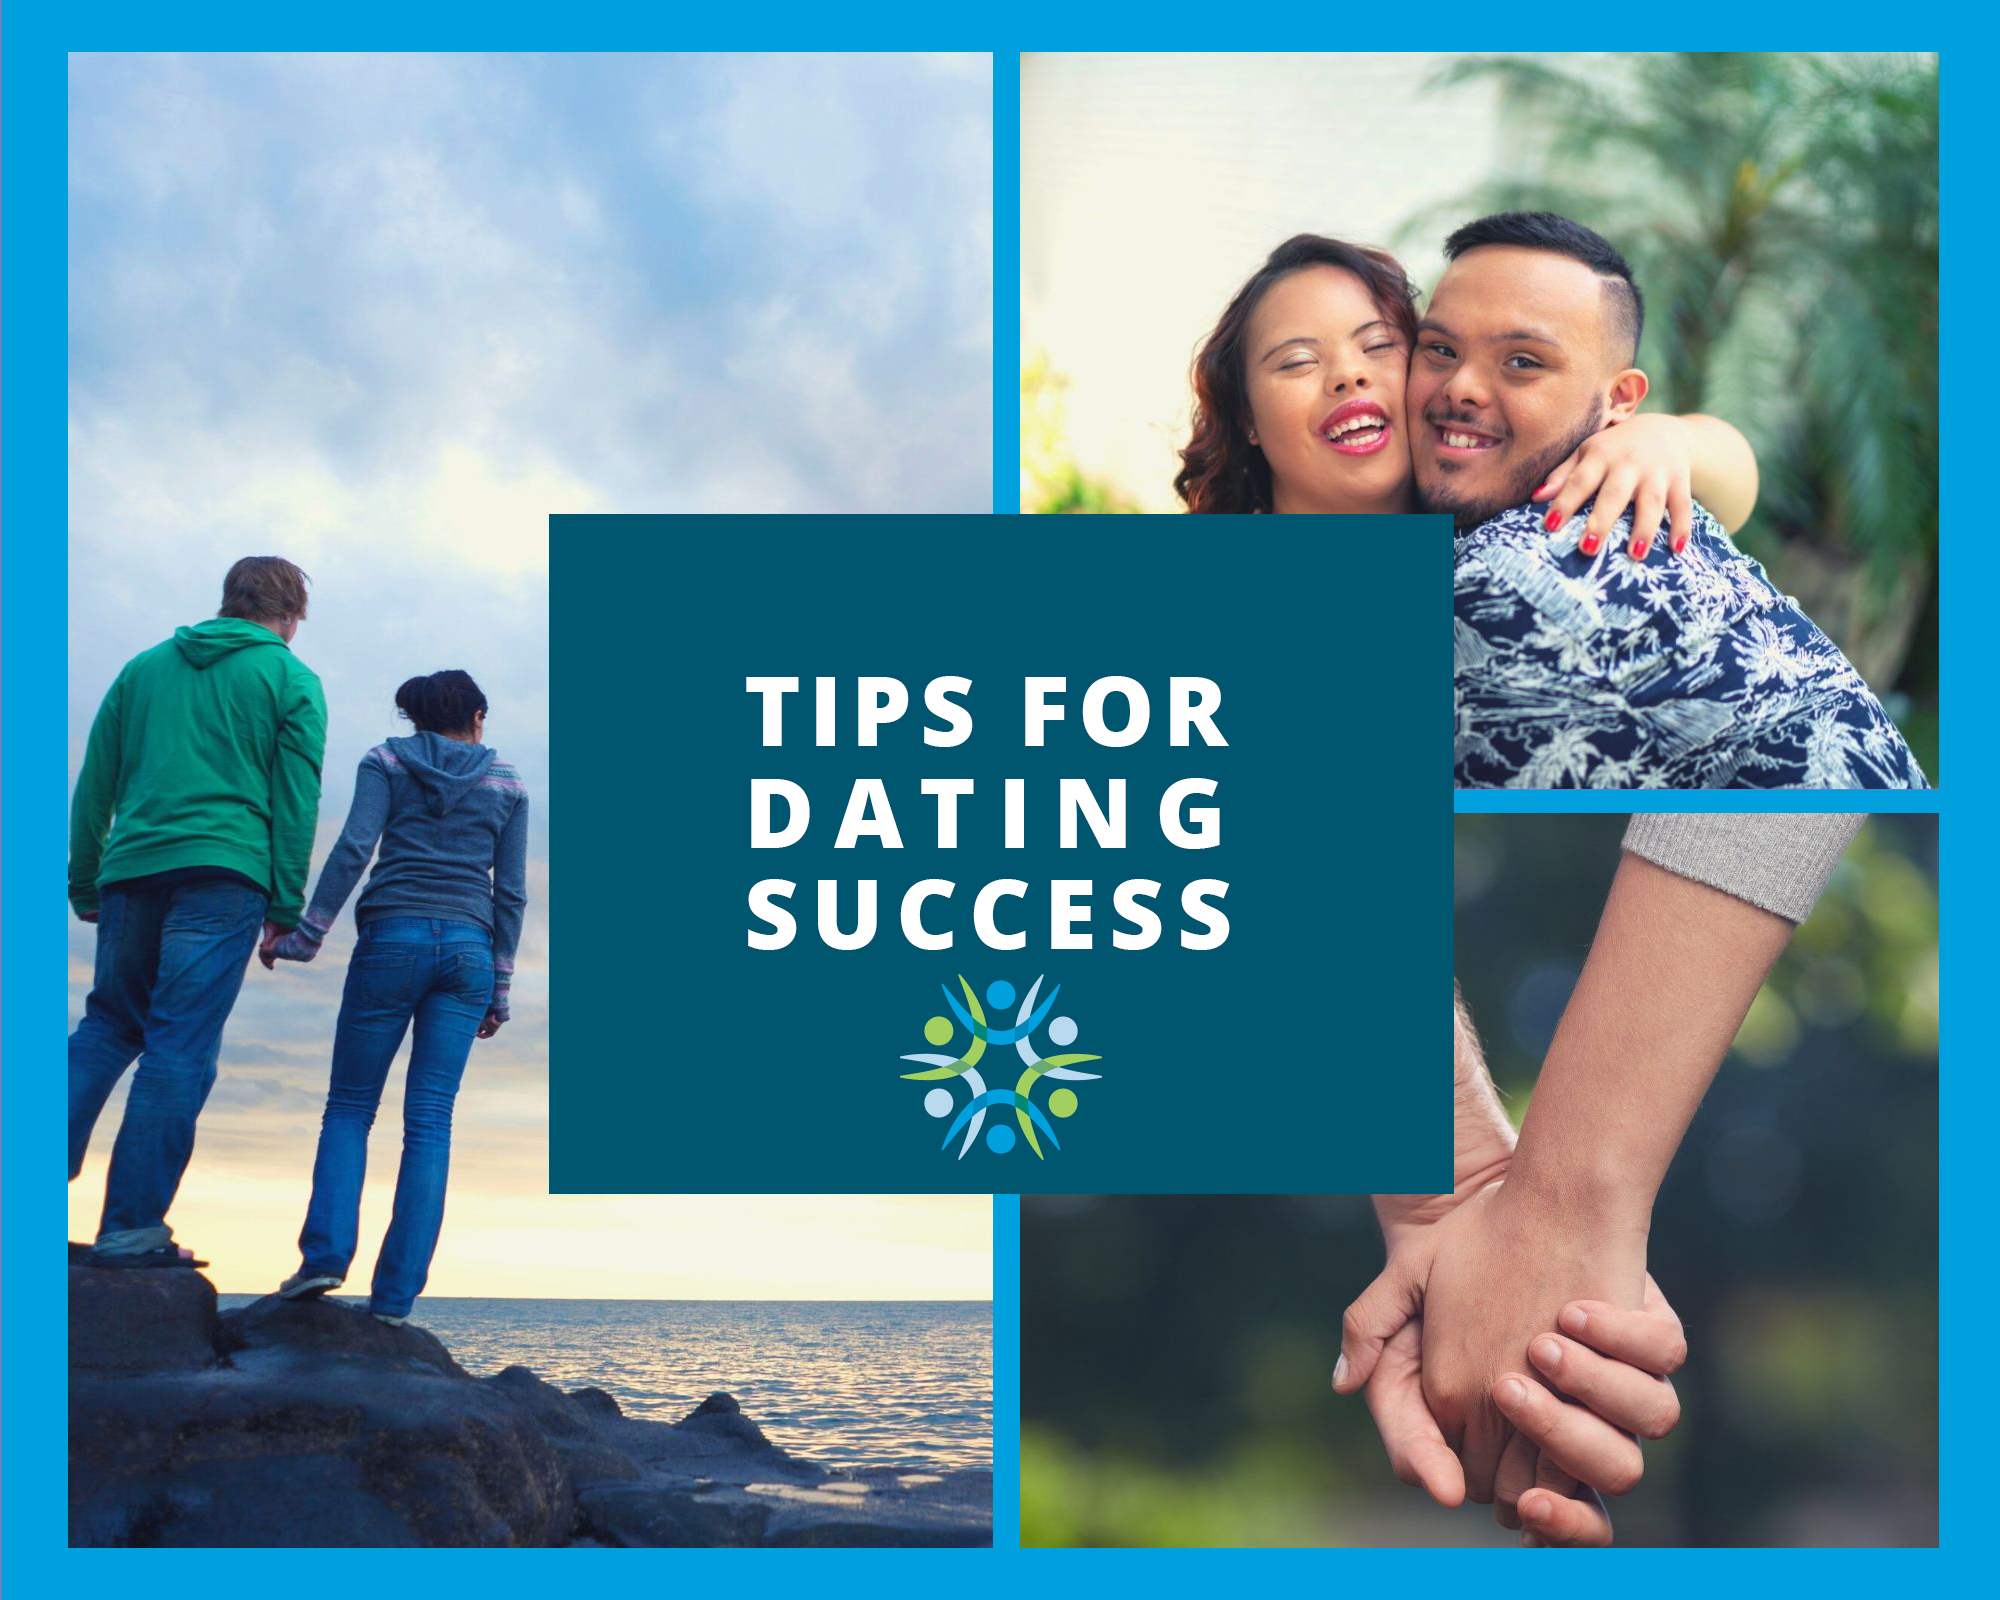 Three pictures appear; a couple holding hands, another couple huggin, and another with hands clasped. A box in the middle says, "Tips for dating success."